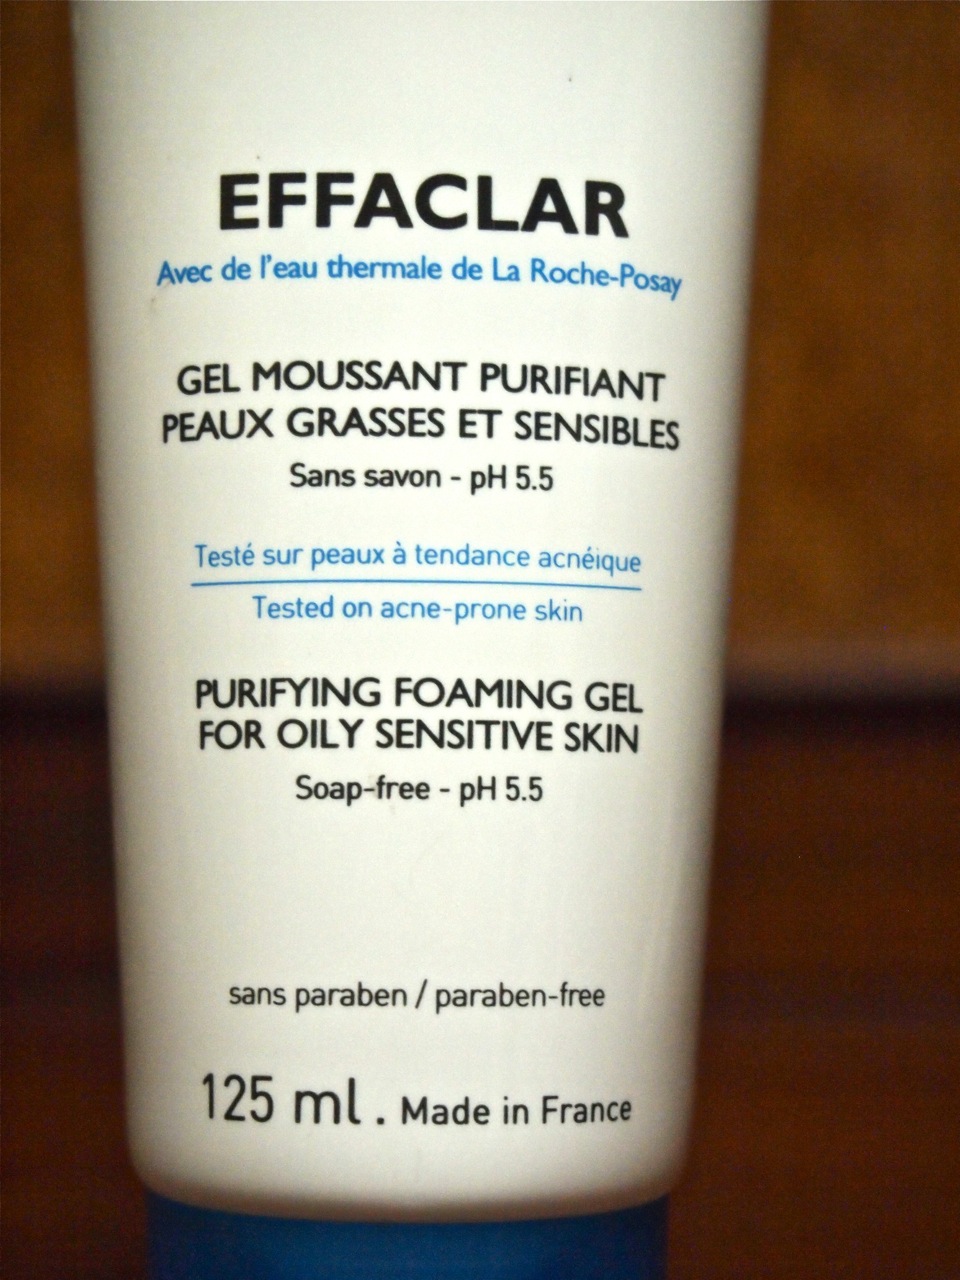 Roche posay effaclar gel moussant purifiant. Эфаклар гель моуссант Пурифиант. Ля Рош эфаклар гель Муссант Пурифиант. Ля Рош позе эфаклар Gel moussant purifiant peaux grasses et sensibles. La Roche Posay Purifying Foaming Gel for oily sensitive Skin.